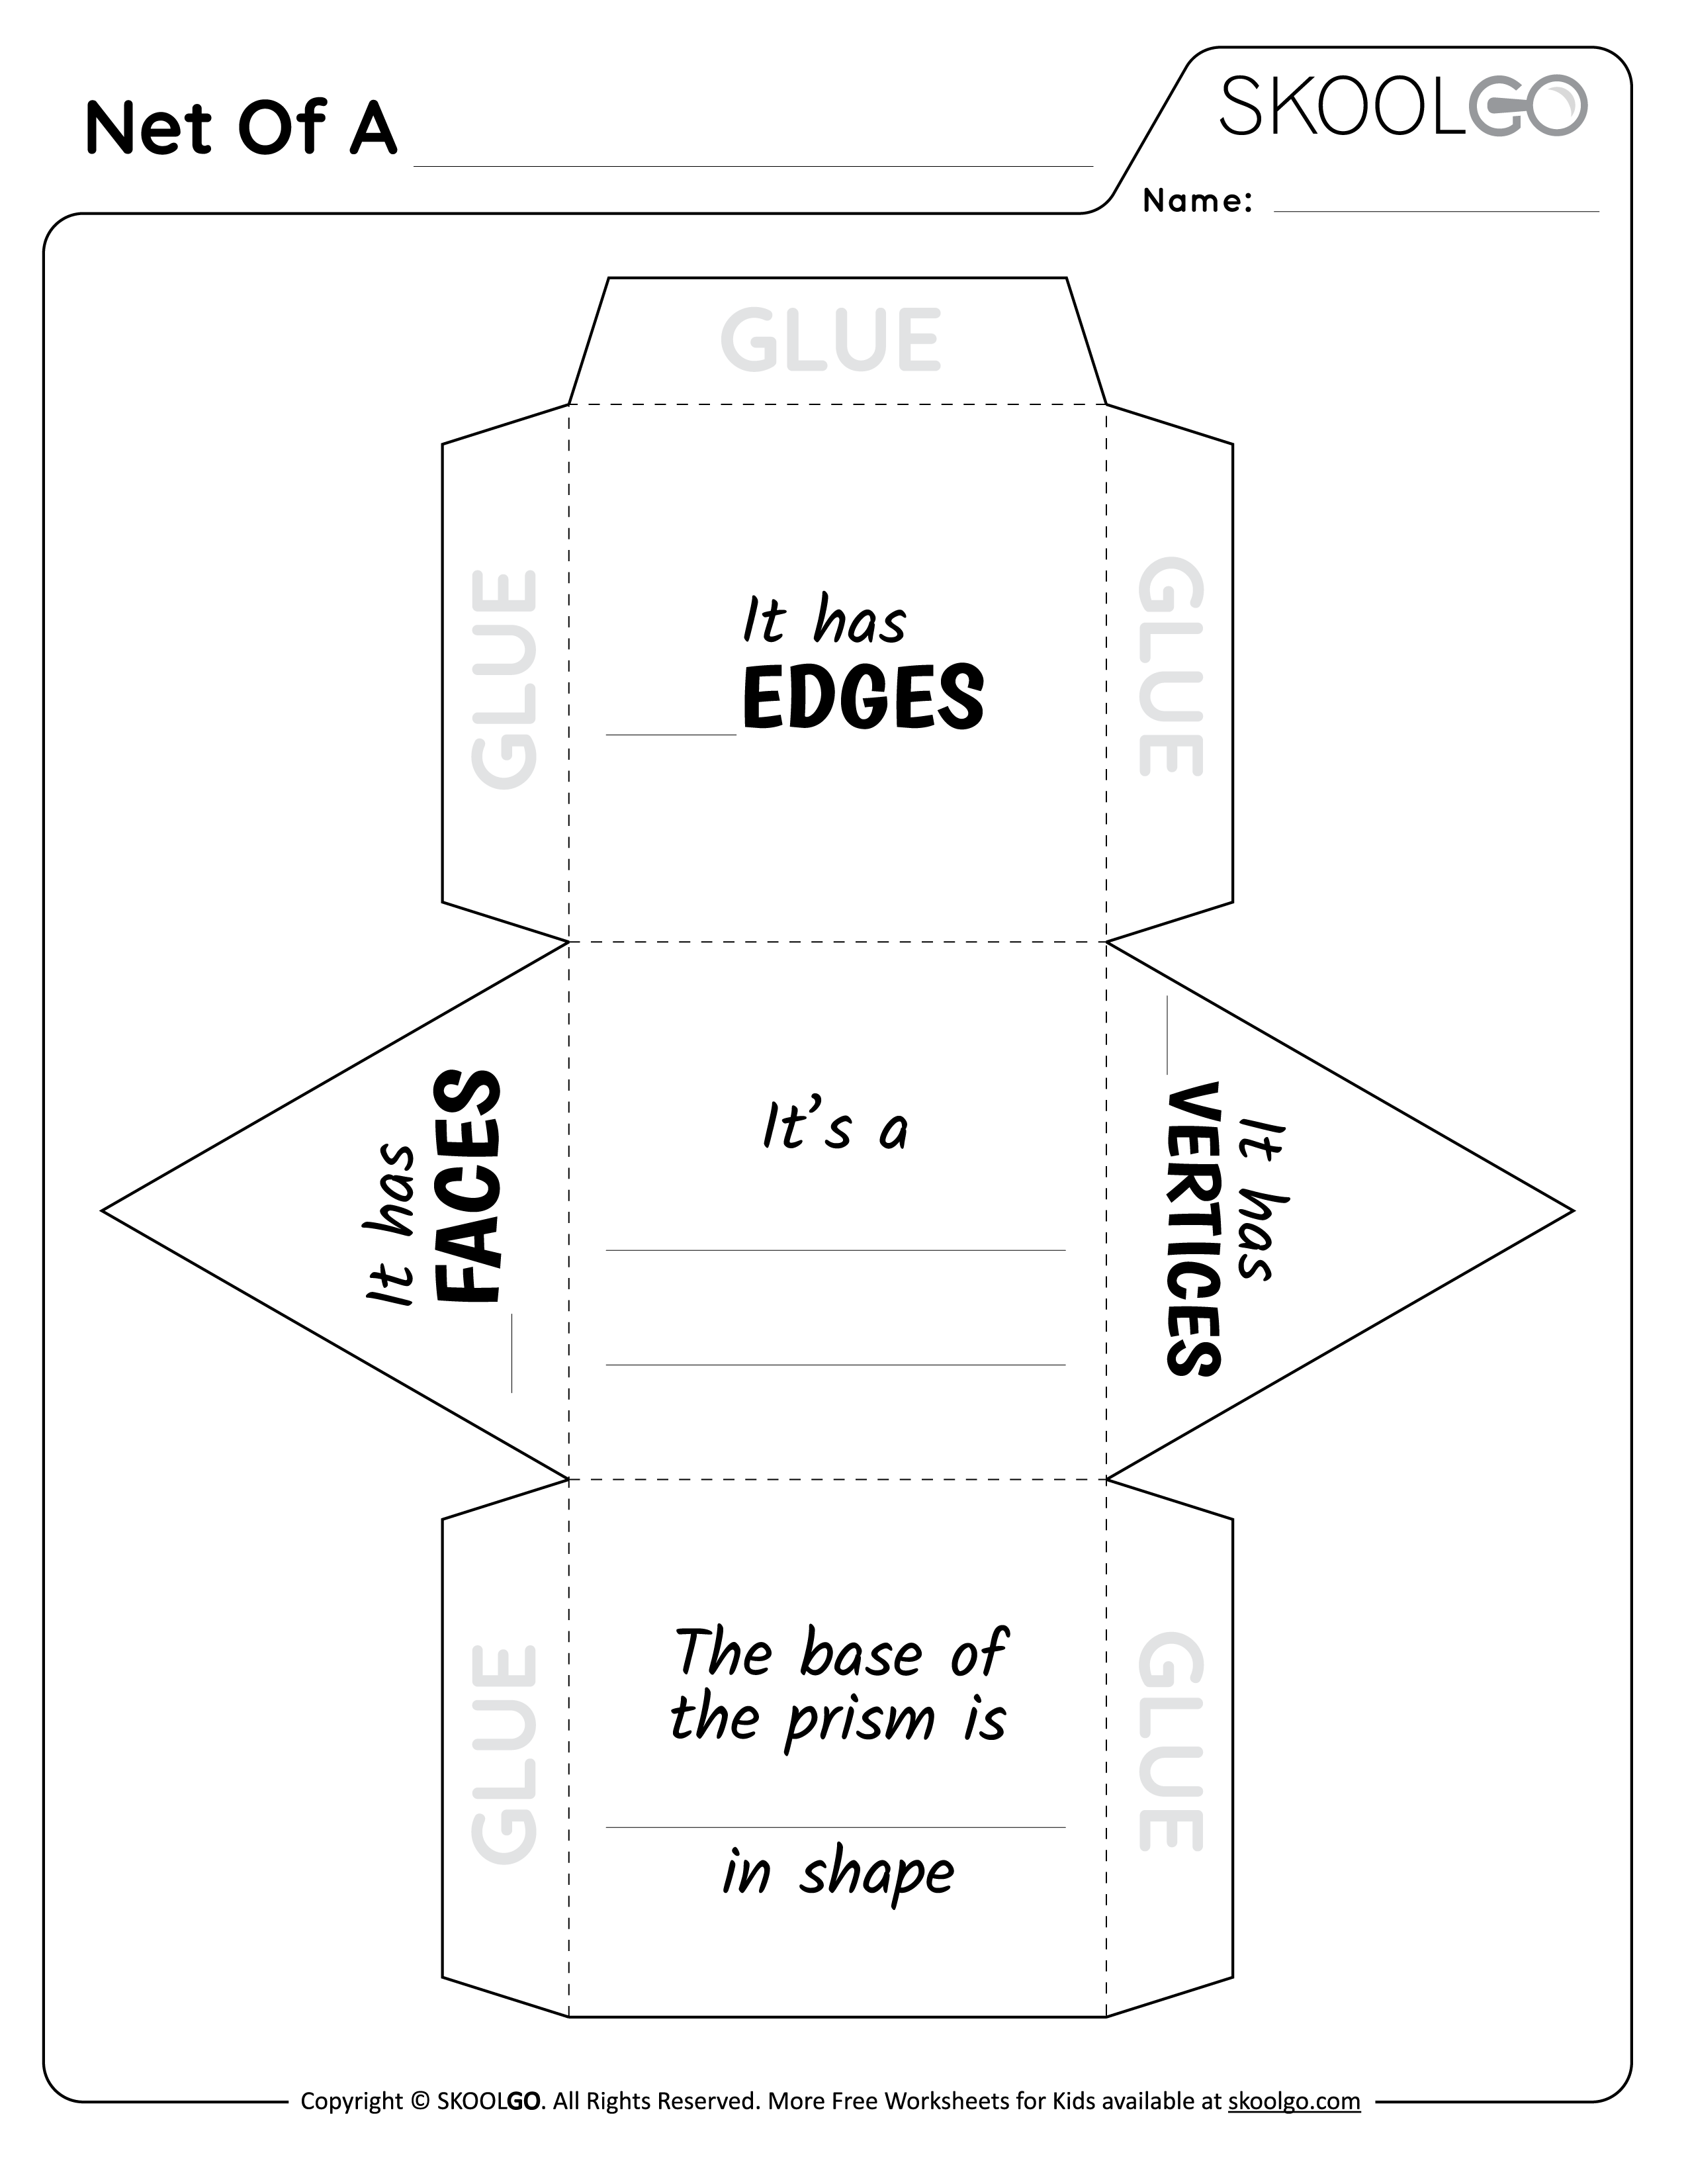 Net Of A Triangular Prism - Free Worksheet for Kids - Activity